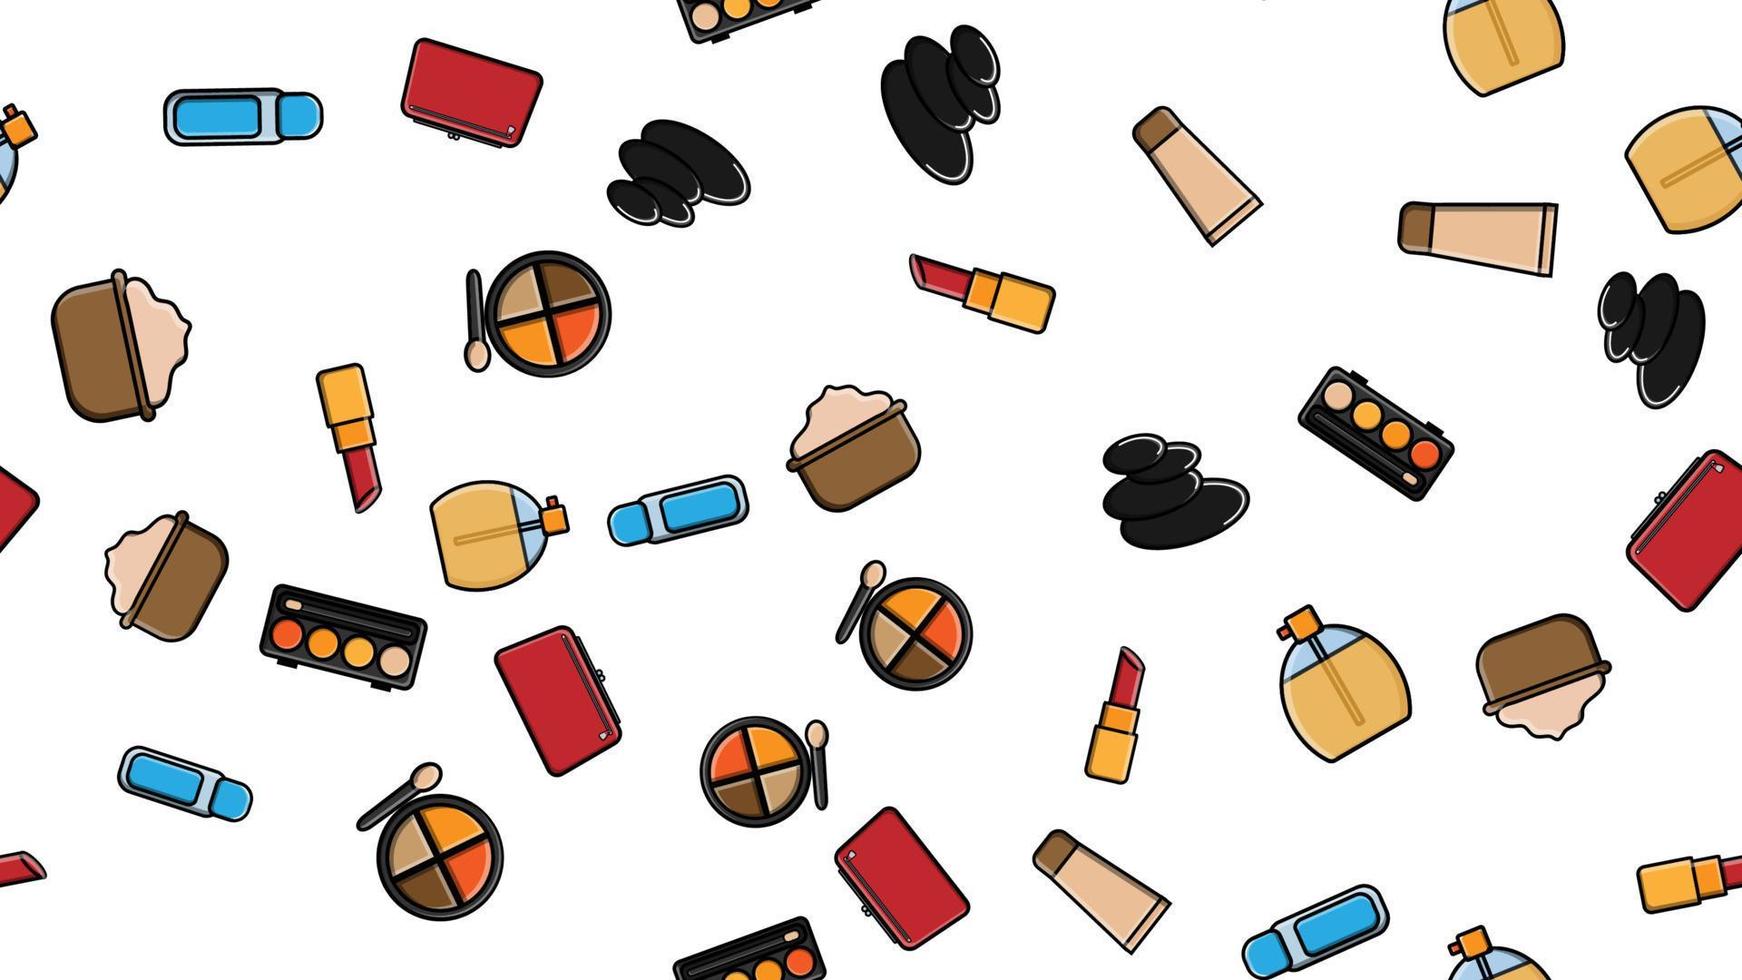 Endless seamless pattern of beautiful beauty items of female glamorous fashionable powders, lipsticks, varnishes, creams, cosmetics on a white background. Vector illustration